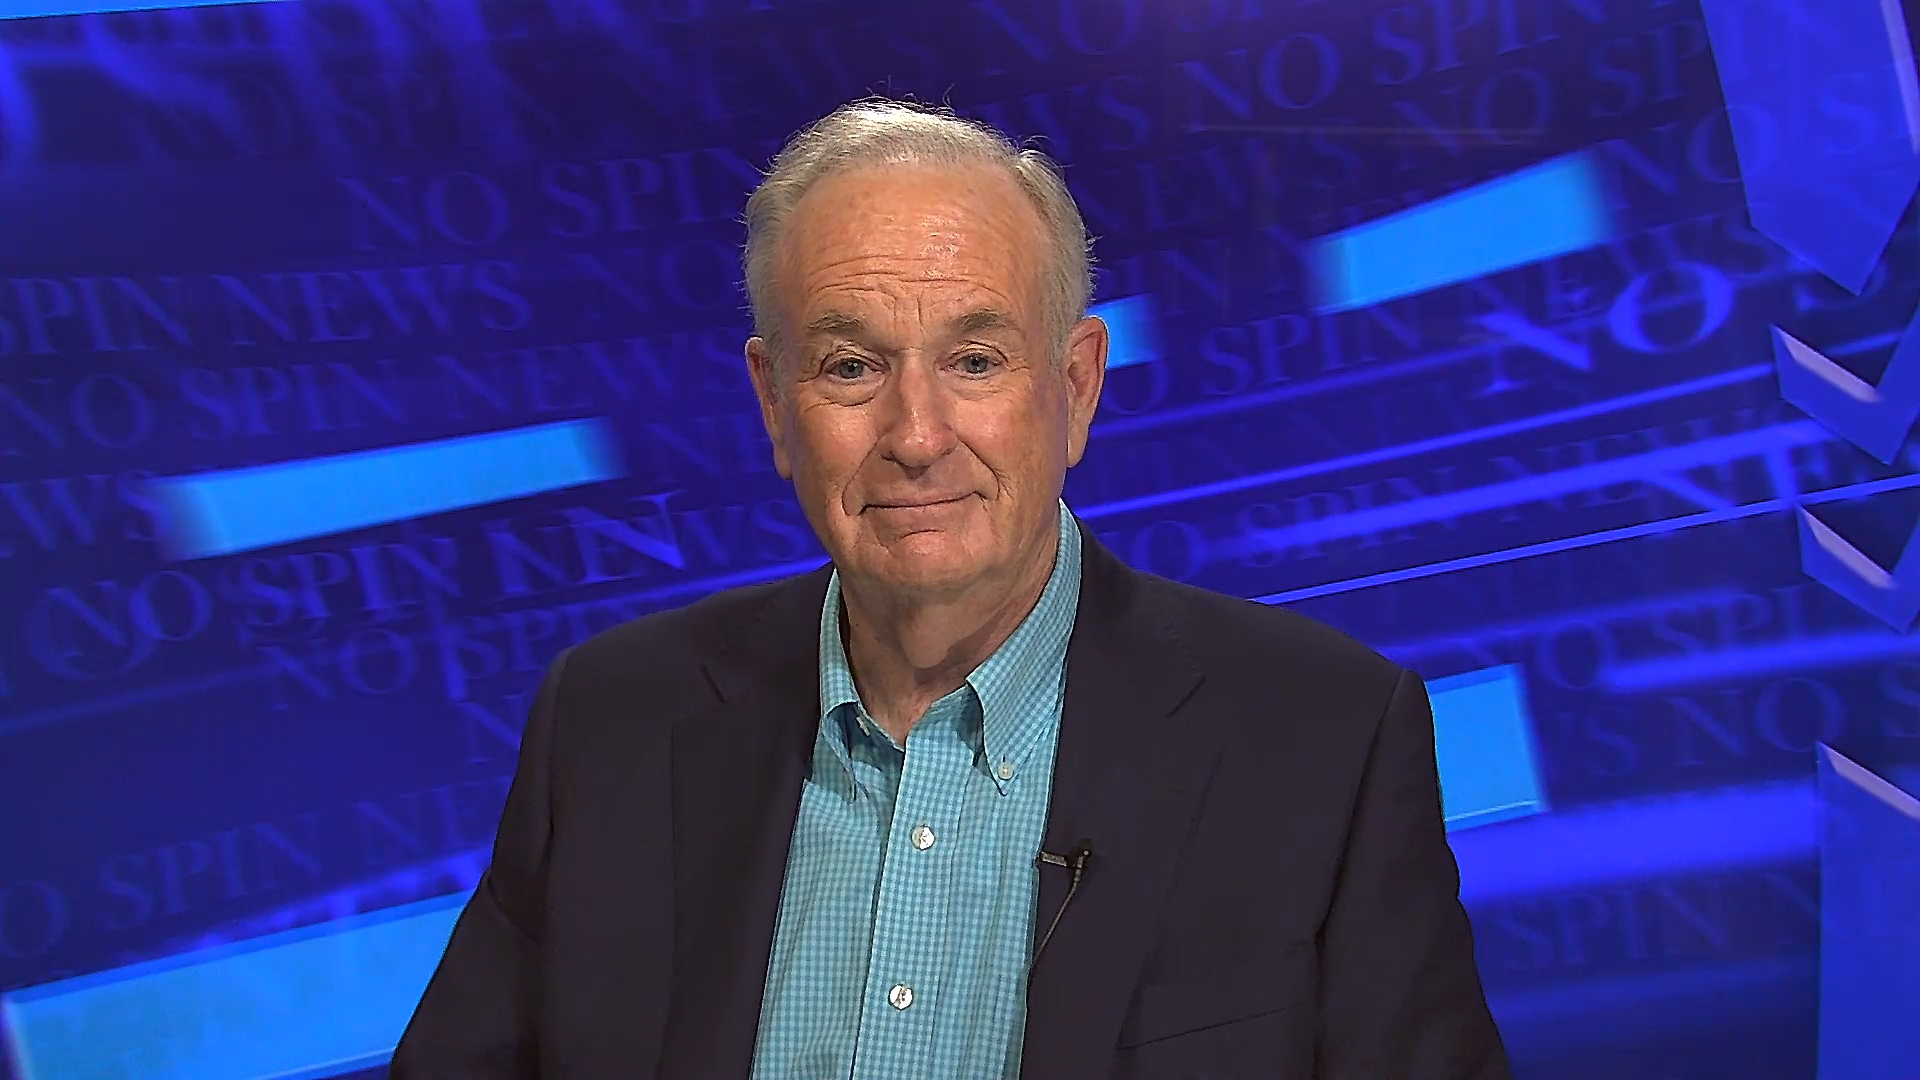 Bill O'Reilly's Live Town Hall on 